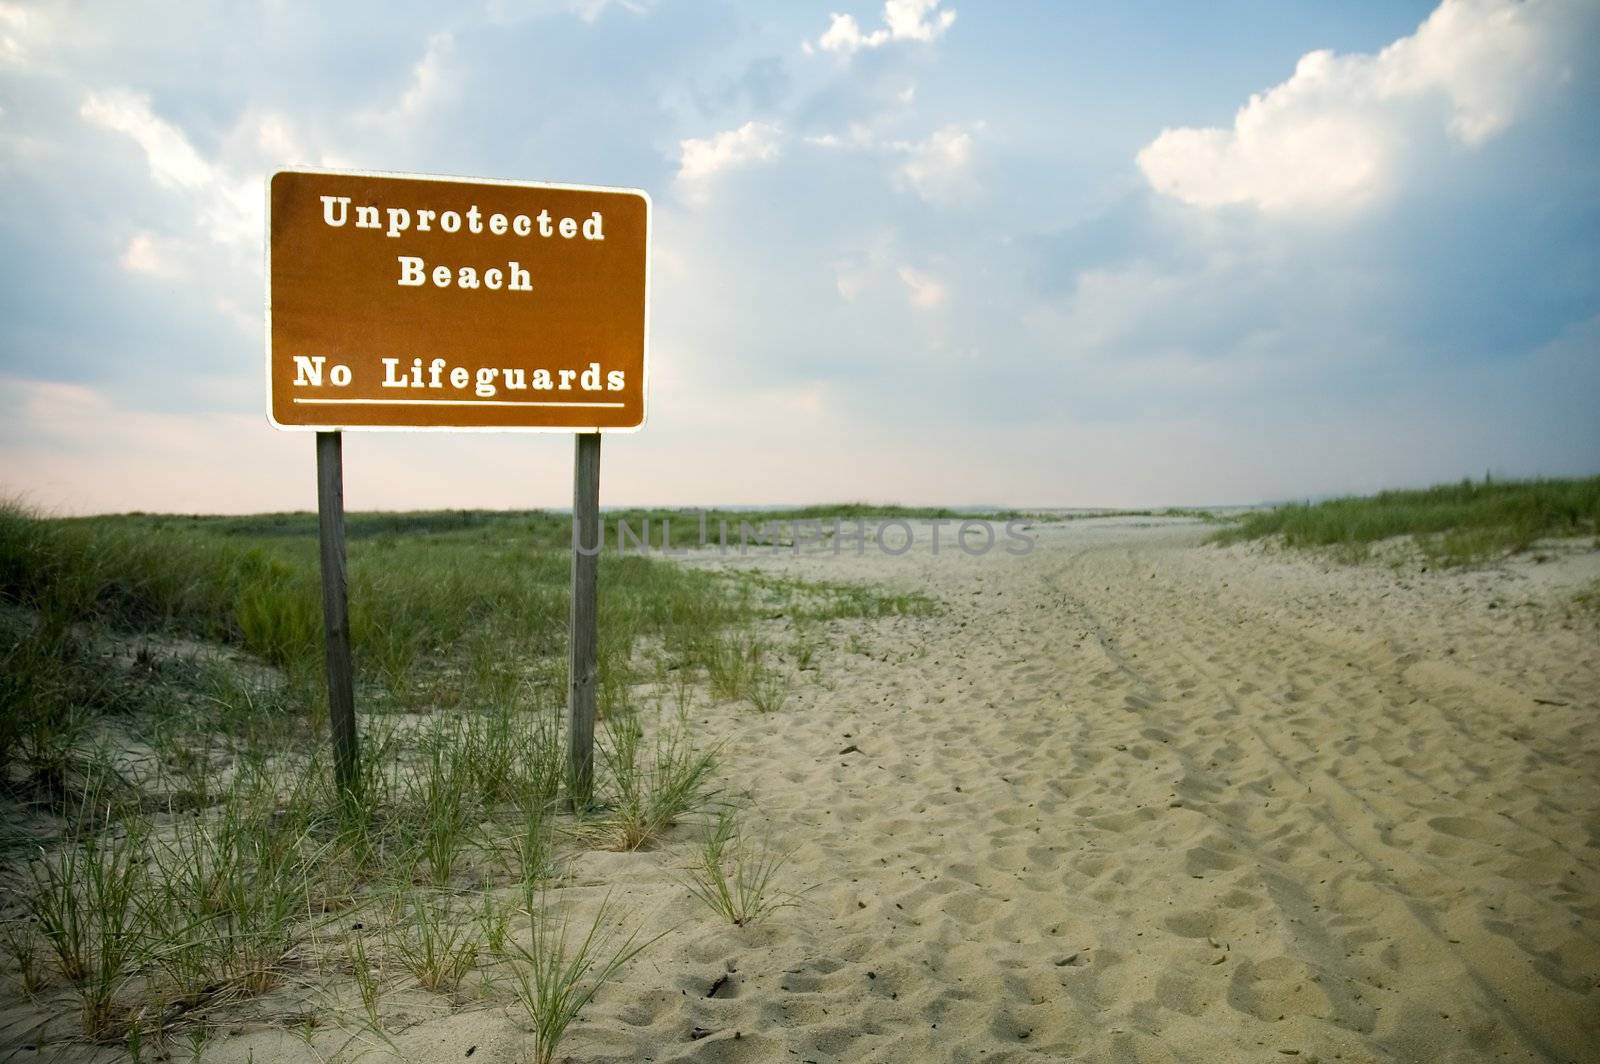 unprotected beach and no lifeguards sign, empty beach, 